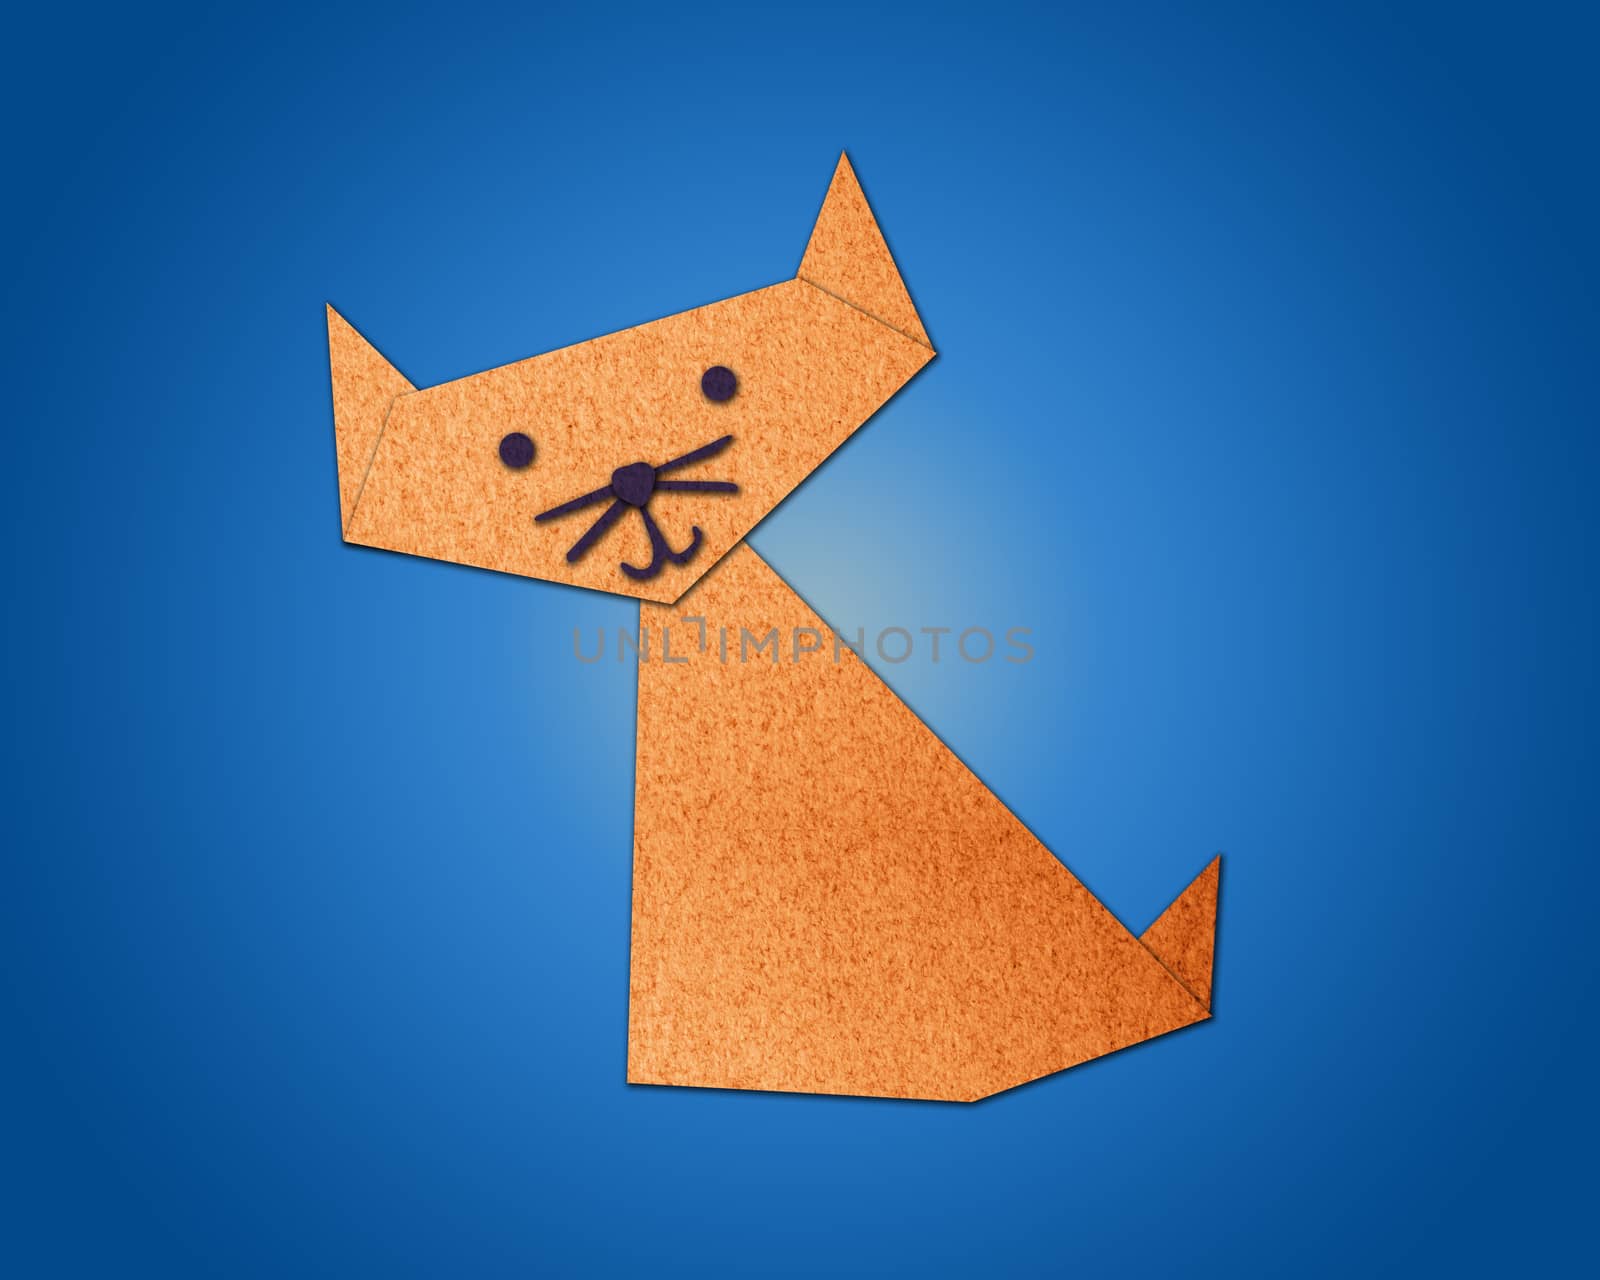 Origami cat made from paper by Sorapop